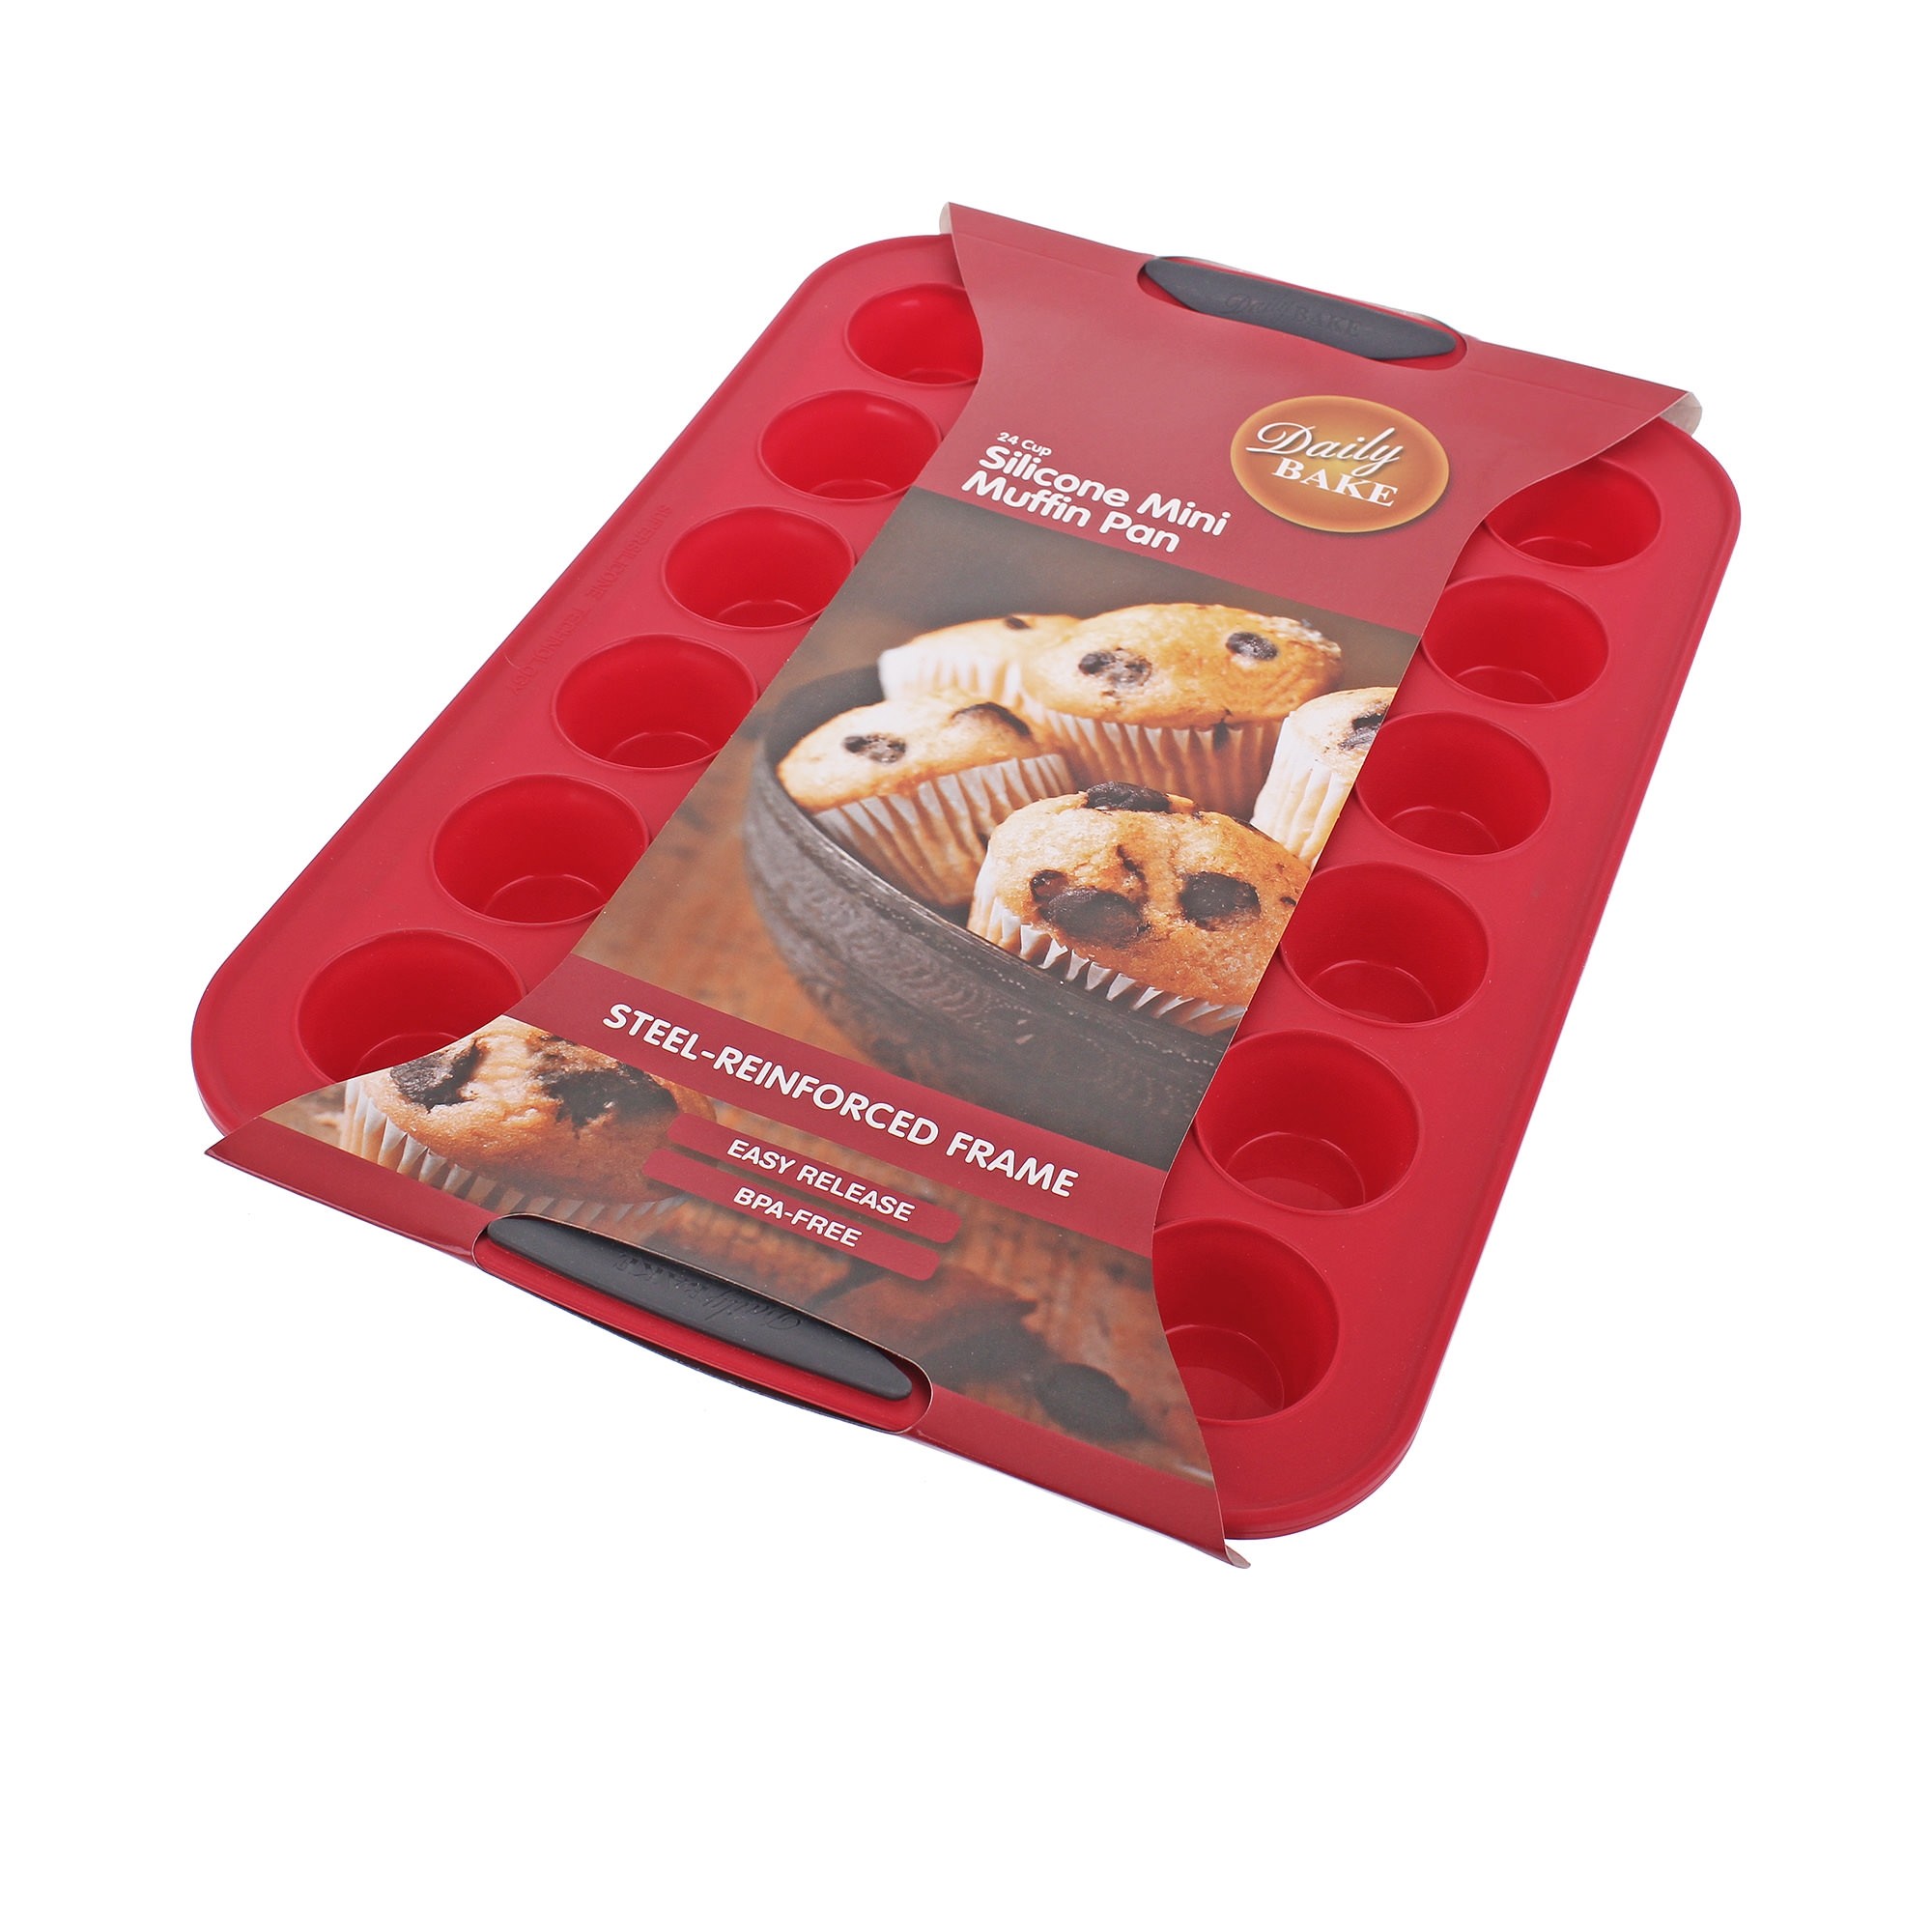 Daily Bake Silicone Mini Muffin Pan 24 Cup Red Image 2